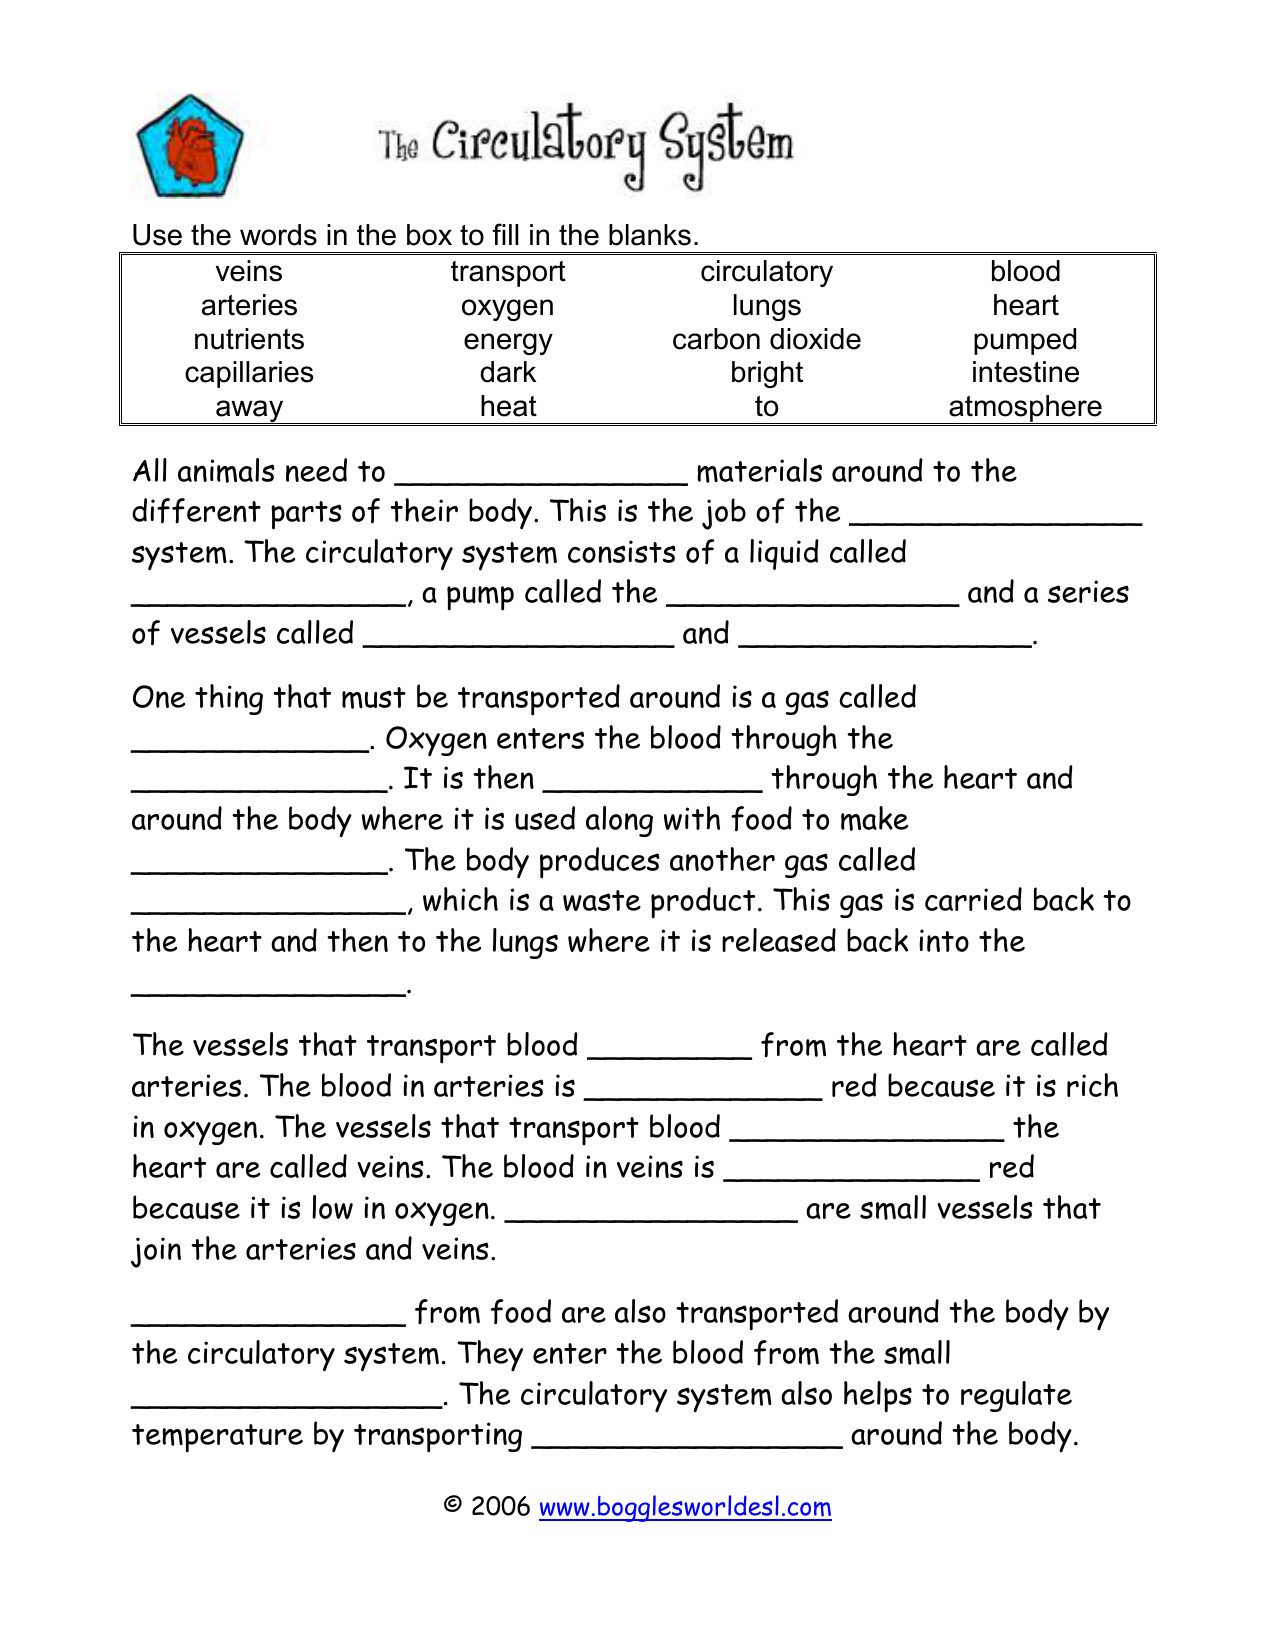 Circulatory System Cloze Within The Cardiovascular System Worksheet